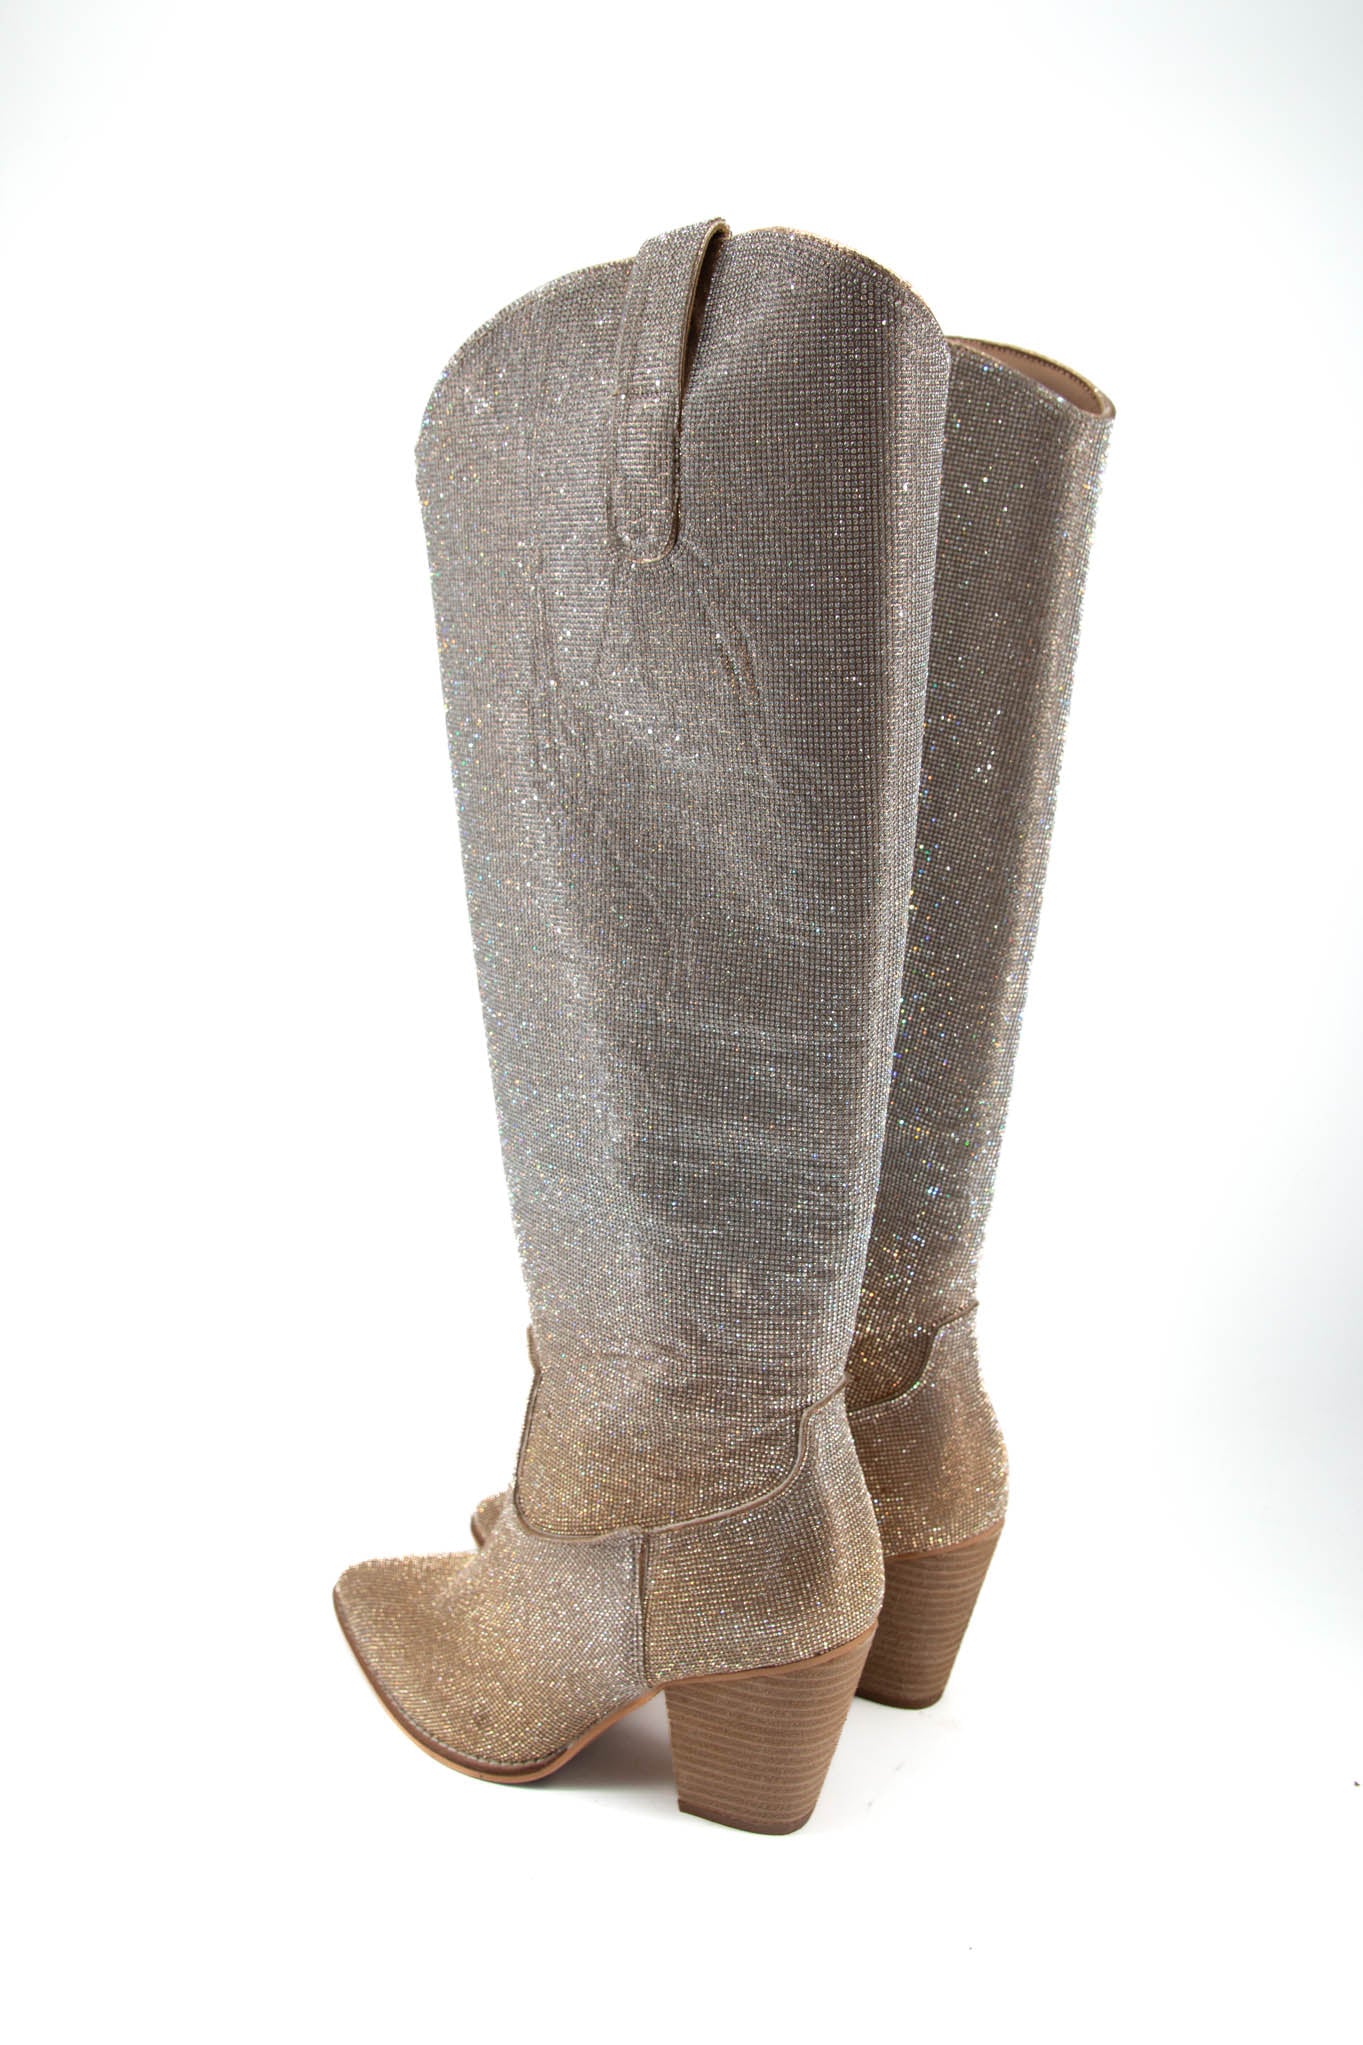 Show Stopper Gold Silver
Ombré Tall boot